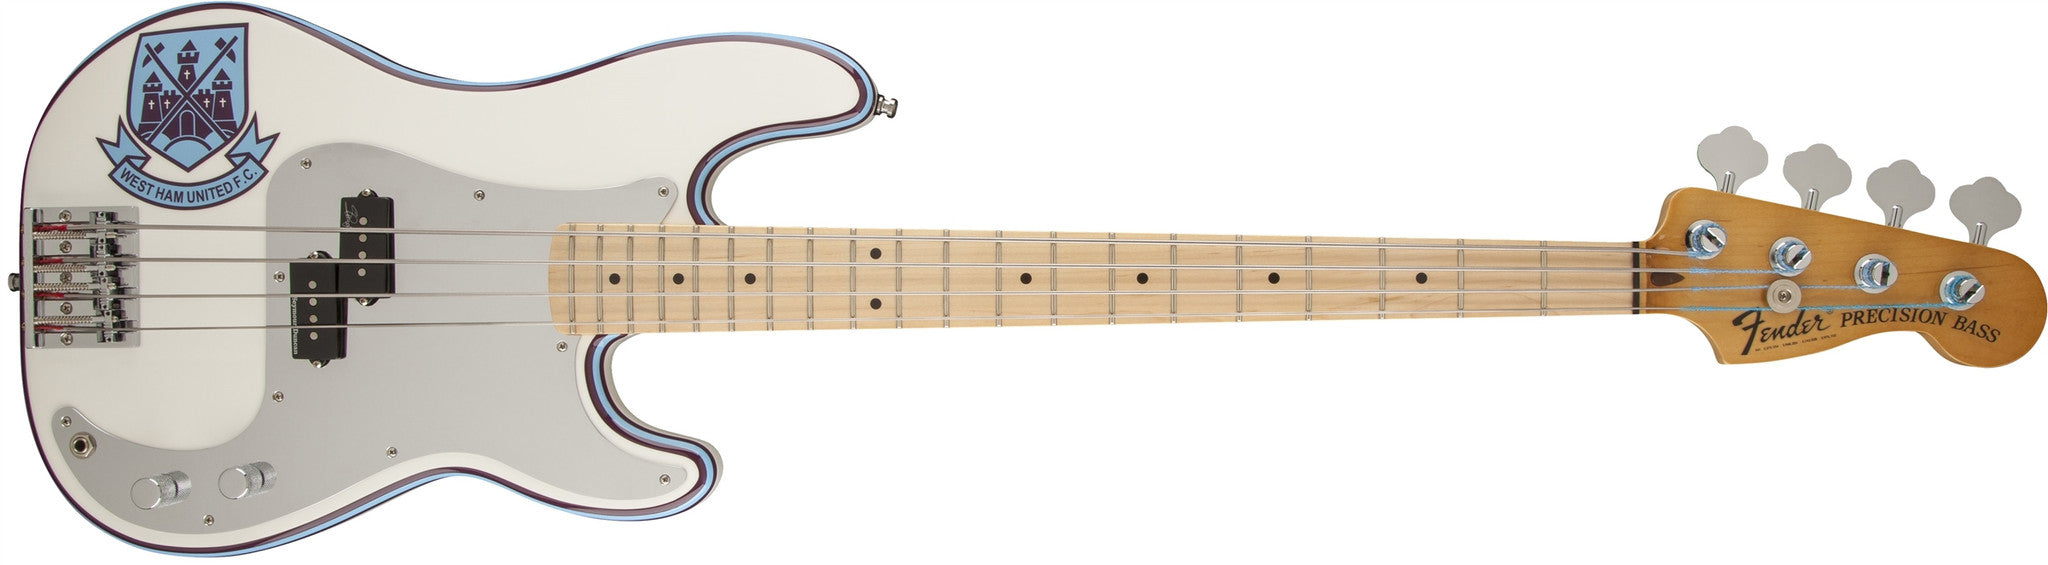 Fender Steve Harris Precision Bass®, Maple Fingerboard, Olympic White 0141032305 - L.A. Music - Canada's Favourite Music Store!